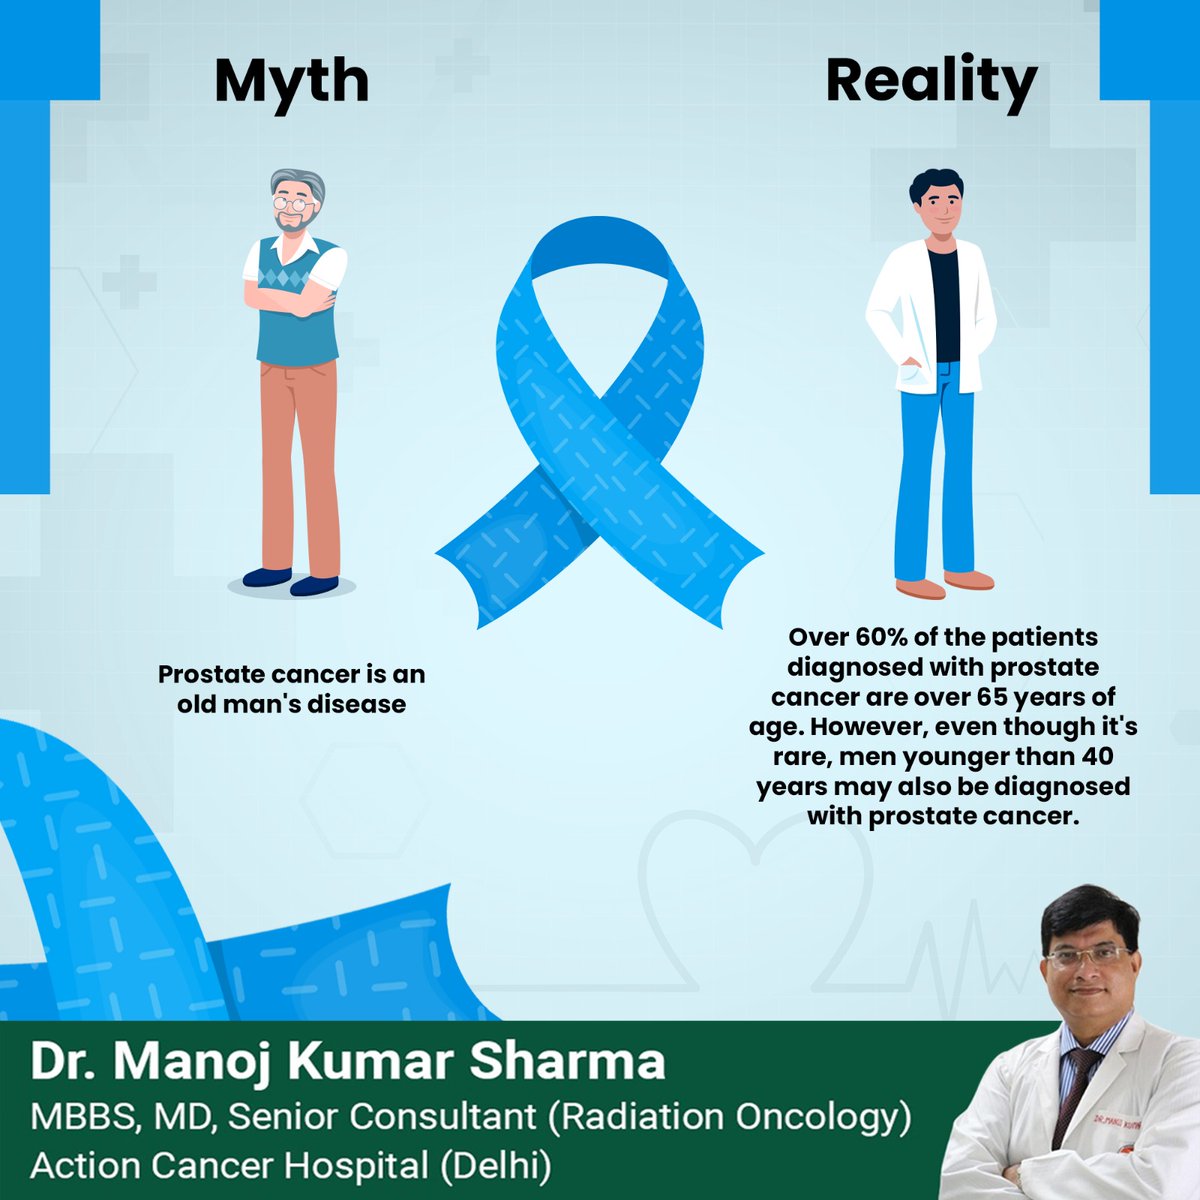 Let's debunk myths and promote proactive awareness. Your health is our priority!

.

.

.

#prostatecancer #prostate #prostatecancertreatment #cancertreatment #cancercure #cancertreatment #cancersurvivor #cancercare #cancer #drmanojkumarsharma #drmanoj #oncologist #oncology